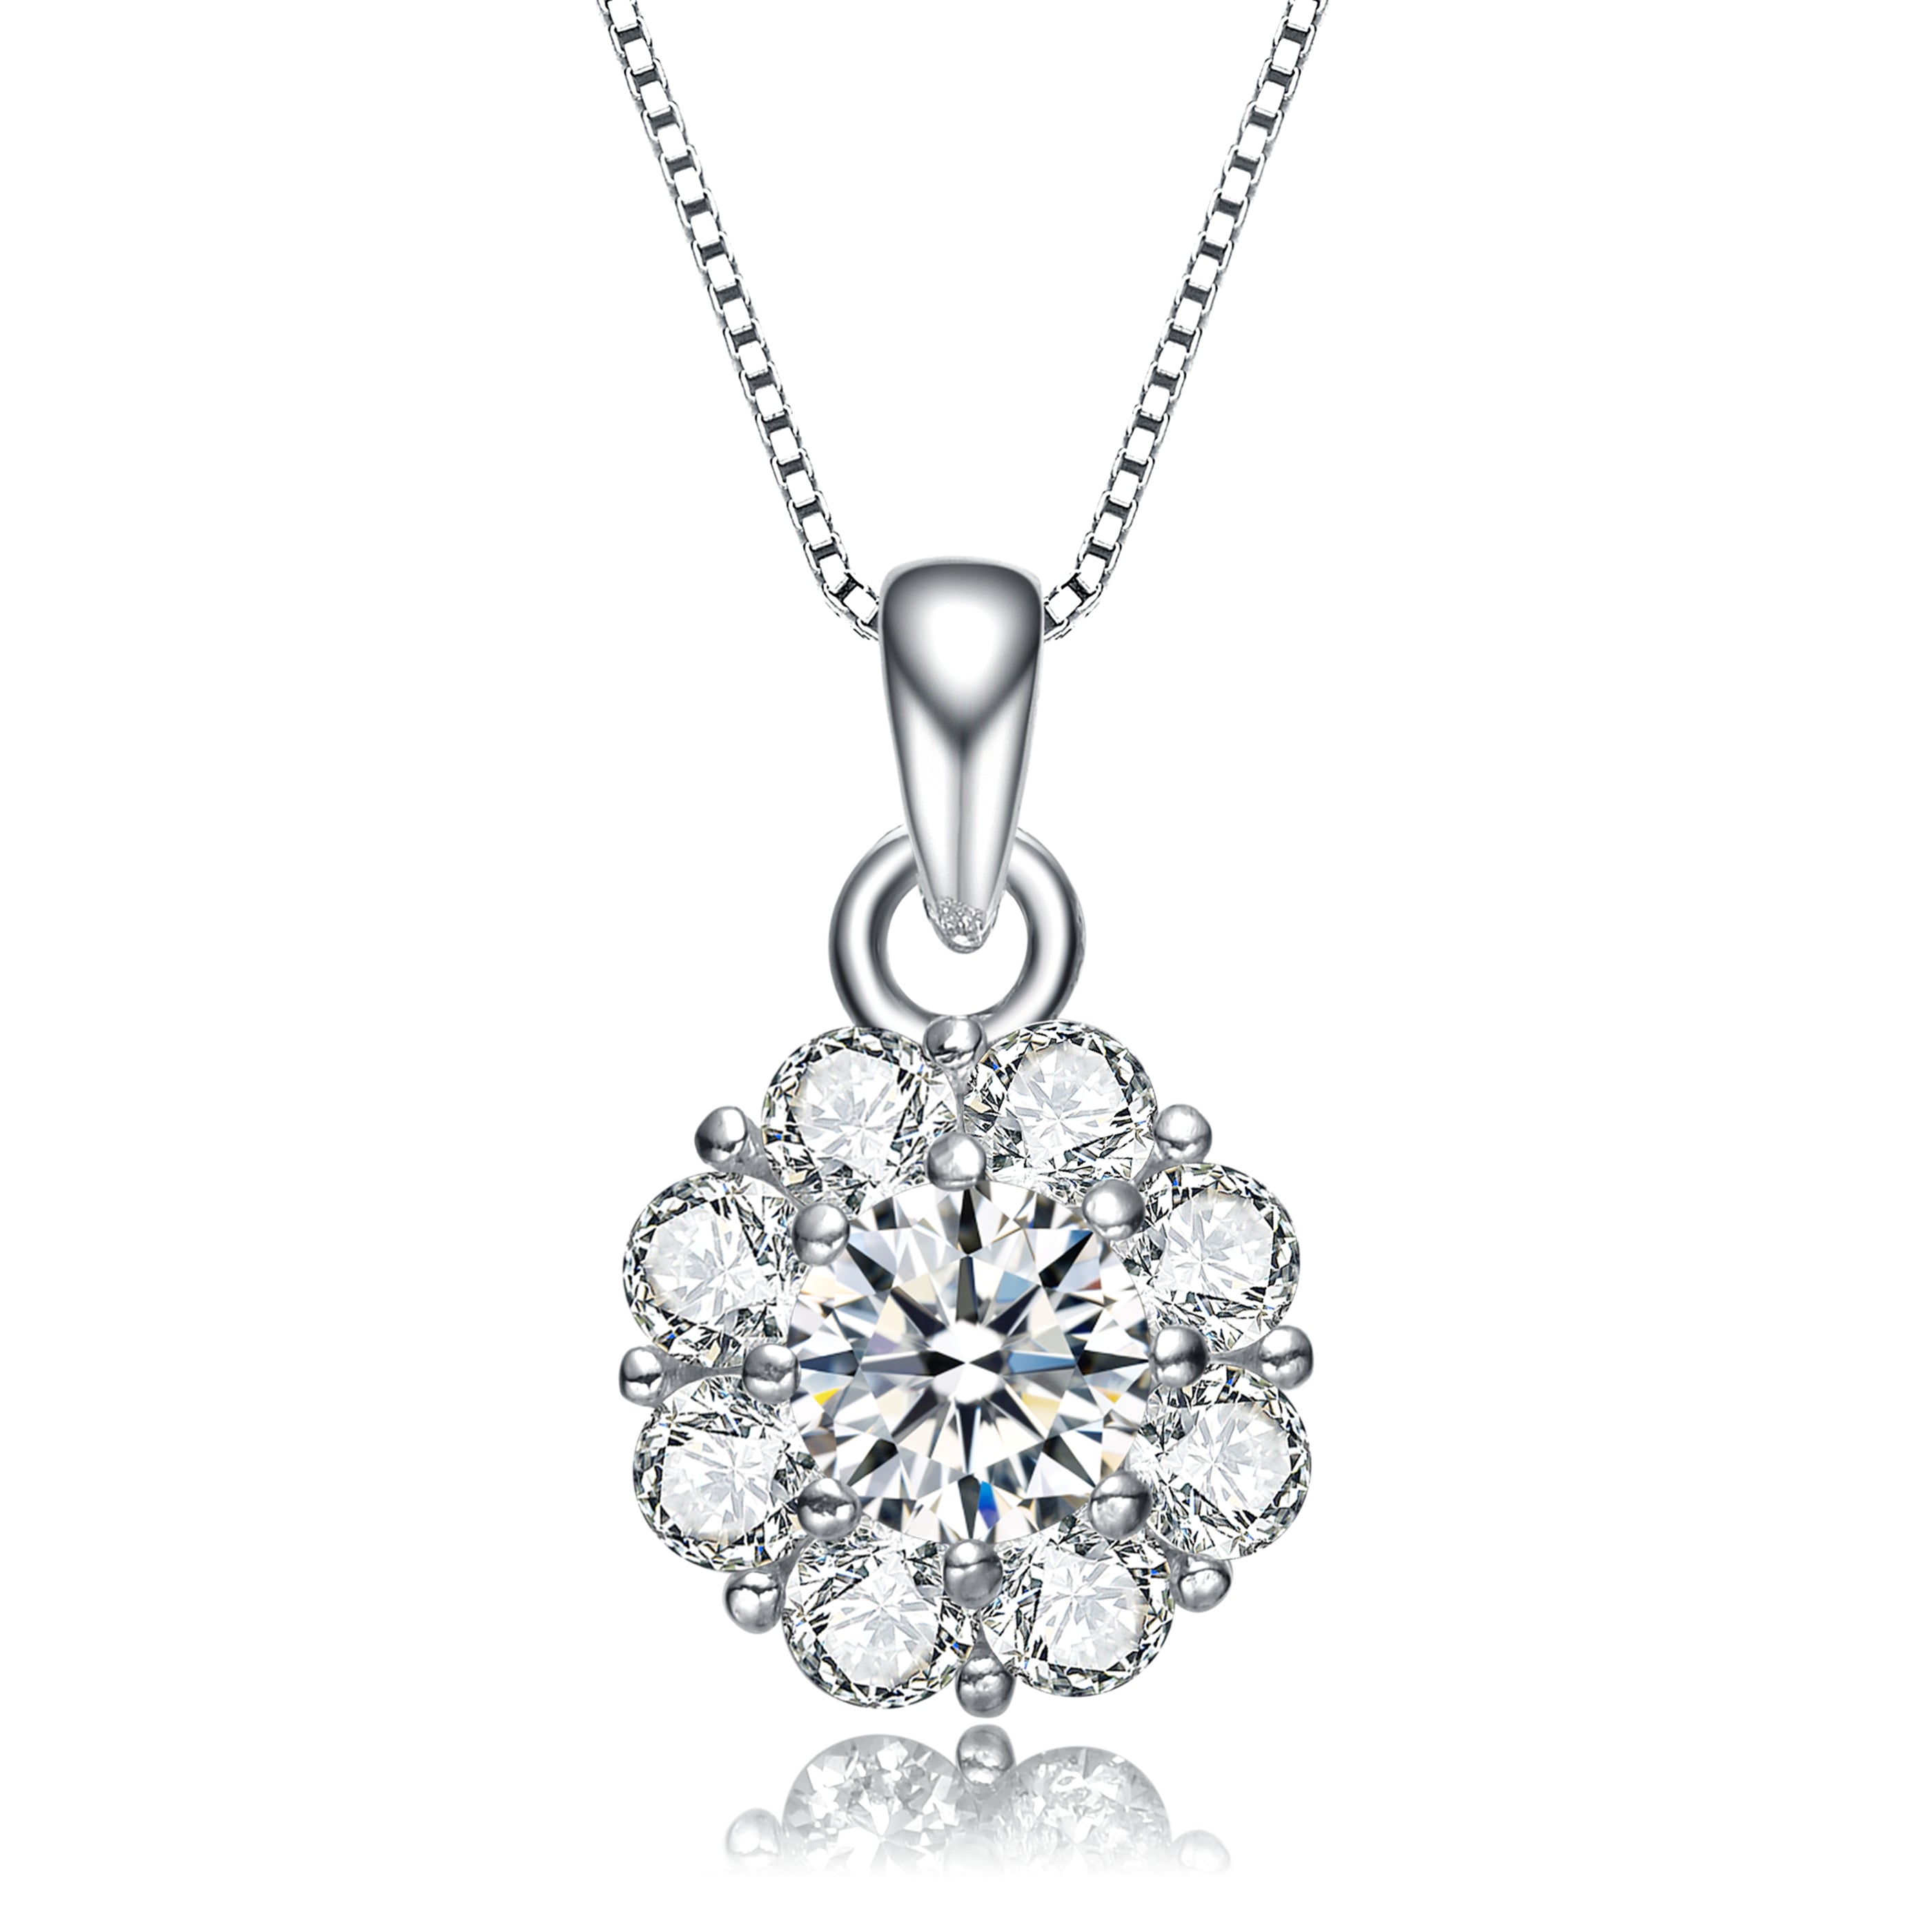 Women’s White / Silver Sterling Silver Flower Inspired Cubic Zirconia Accent Pendant Necklace Genevive Jewelry